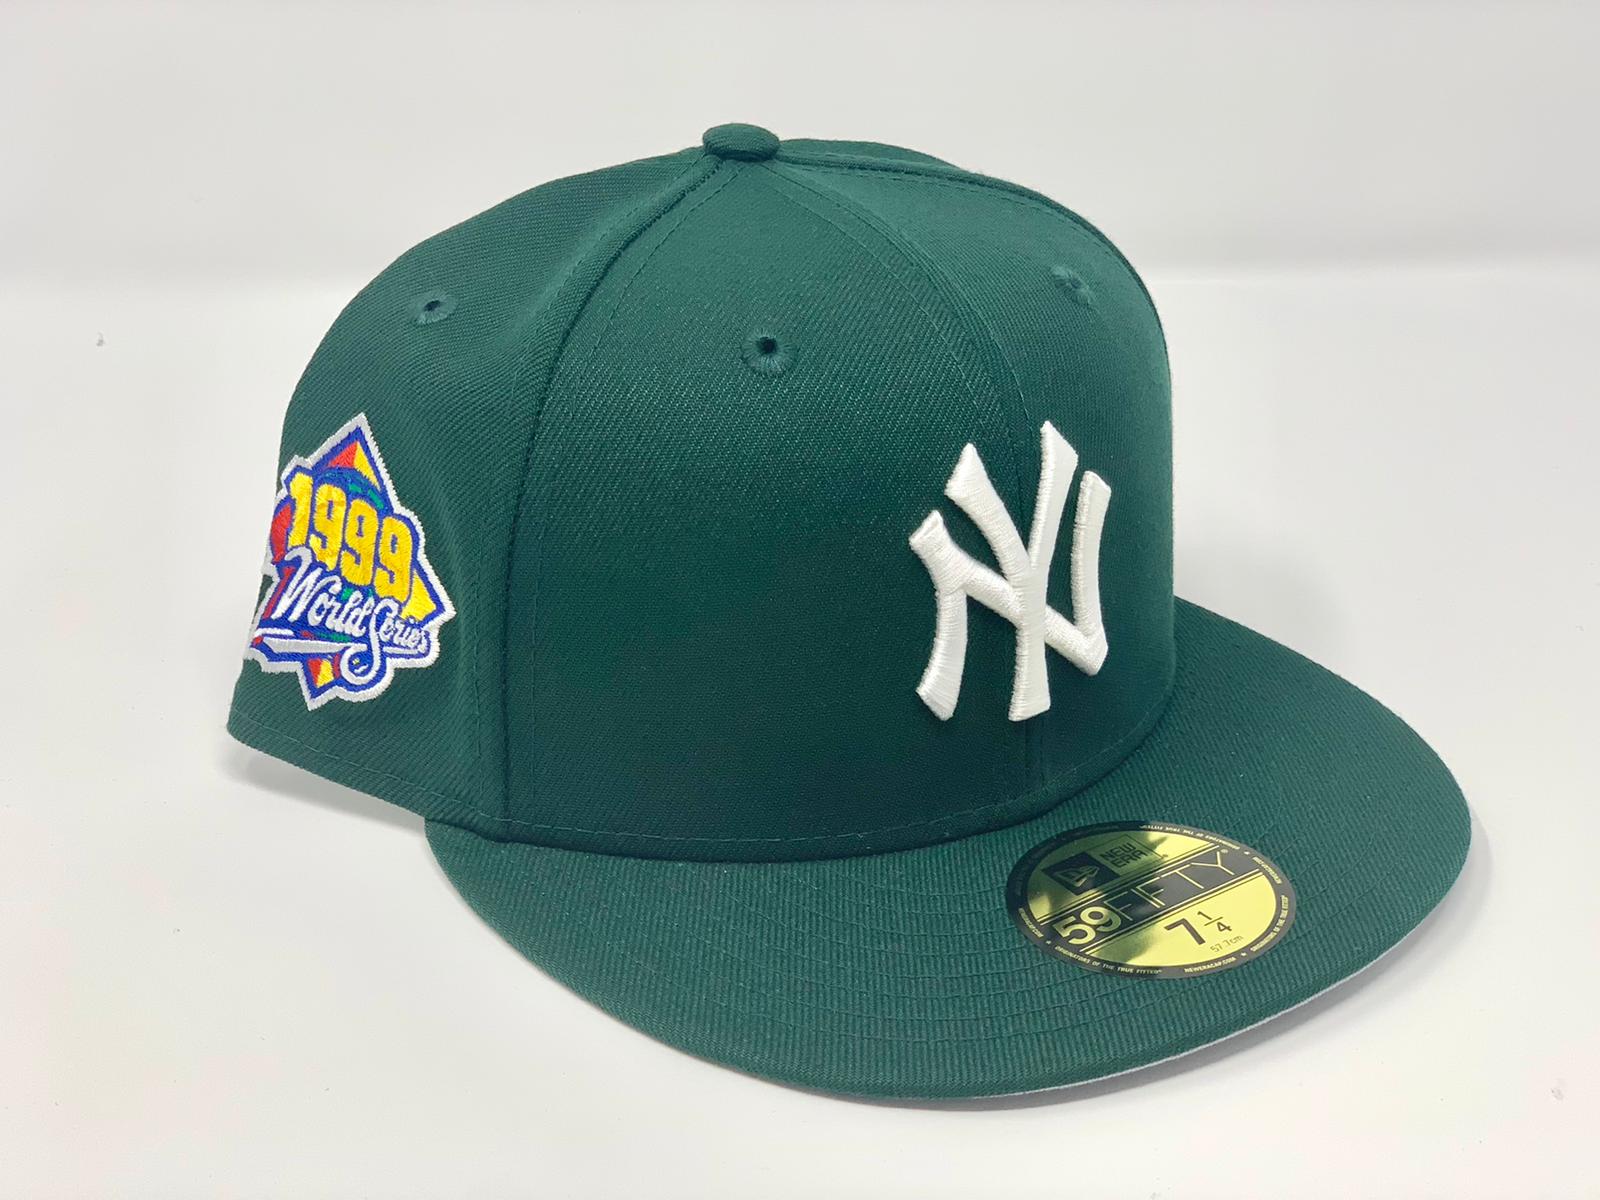 Concepts x New Era 59FIFTY New York Yankees 1999 World Series Fitted Hat (Green) 7 1/2